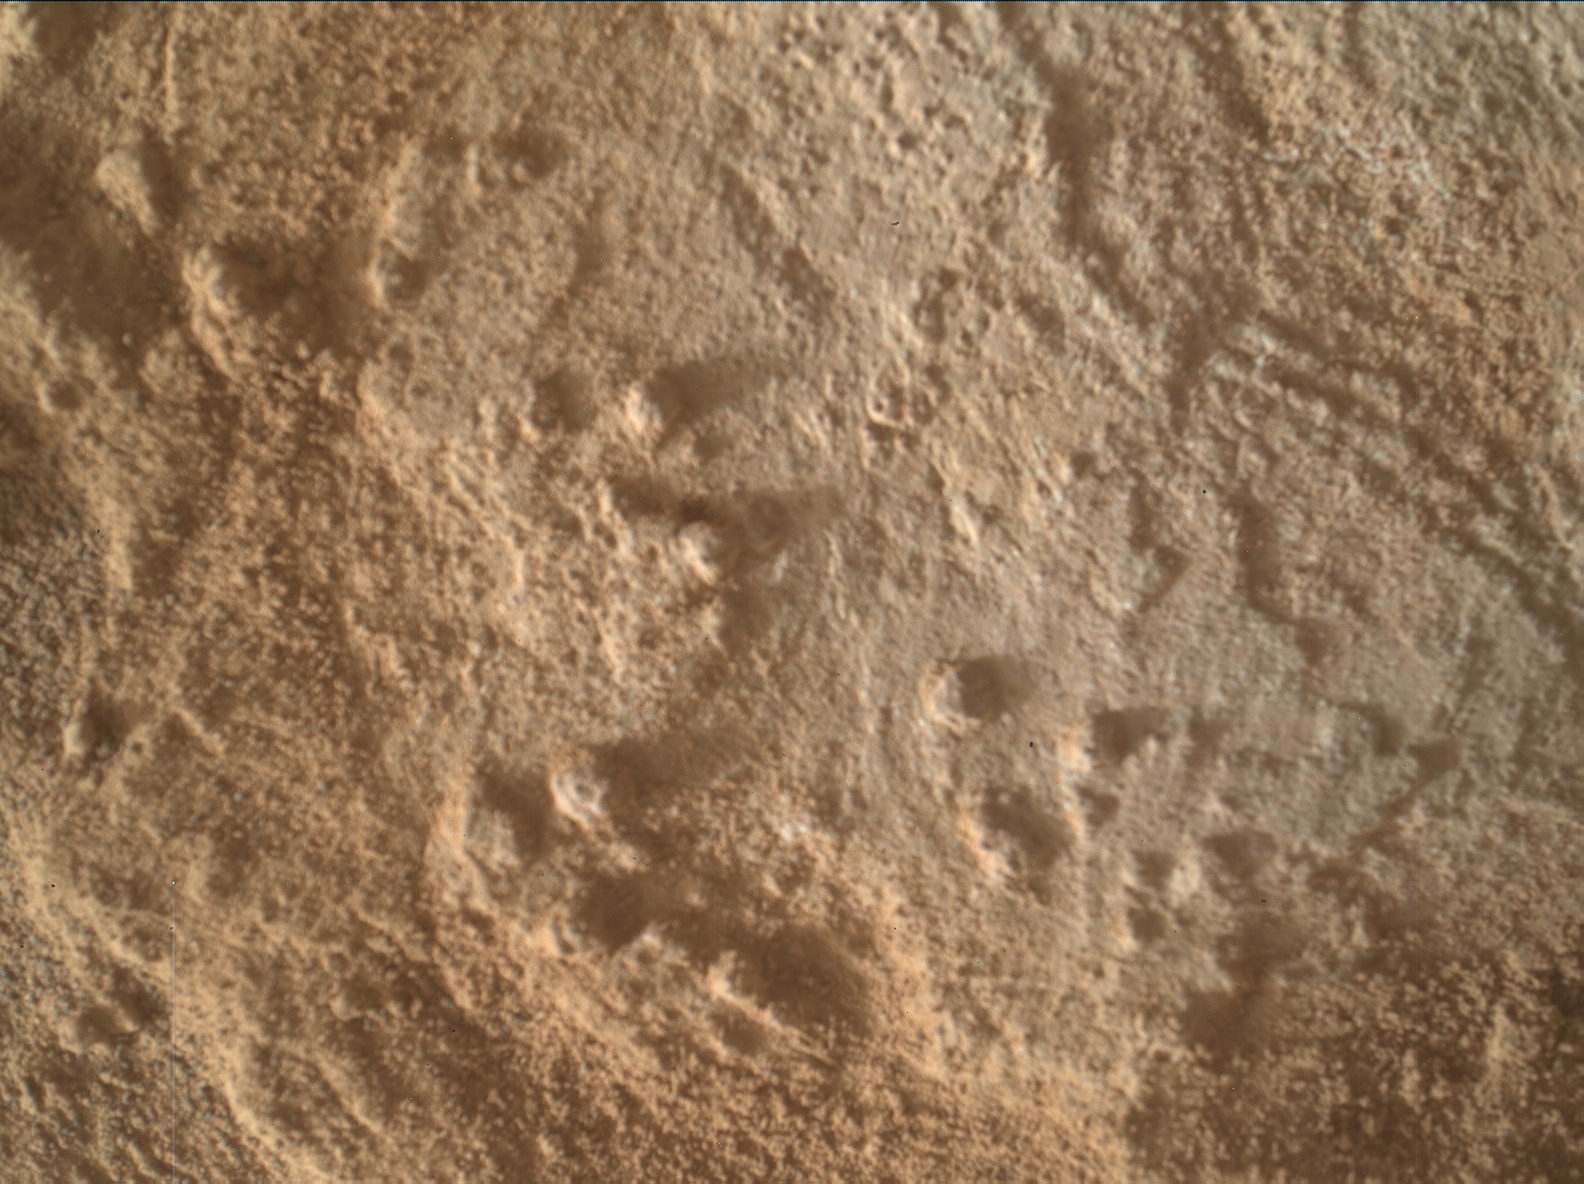 Nasa's Mars rover Curiosity acquired this image using its Mars Hand Lens Imager (MAHLI) on Sol 3344